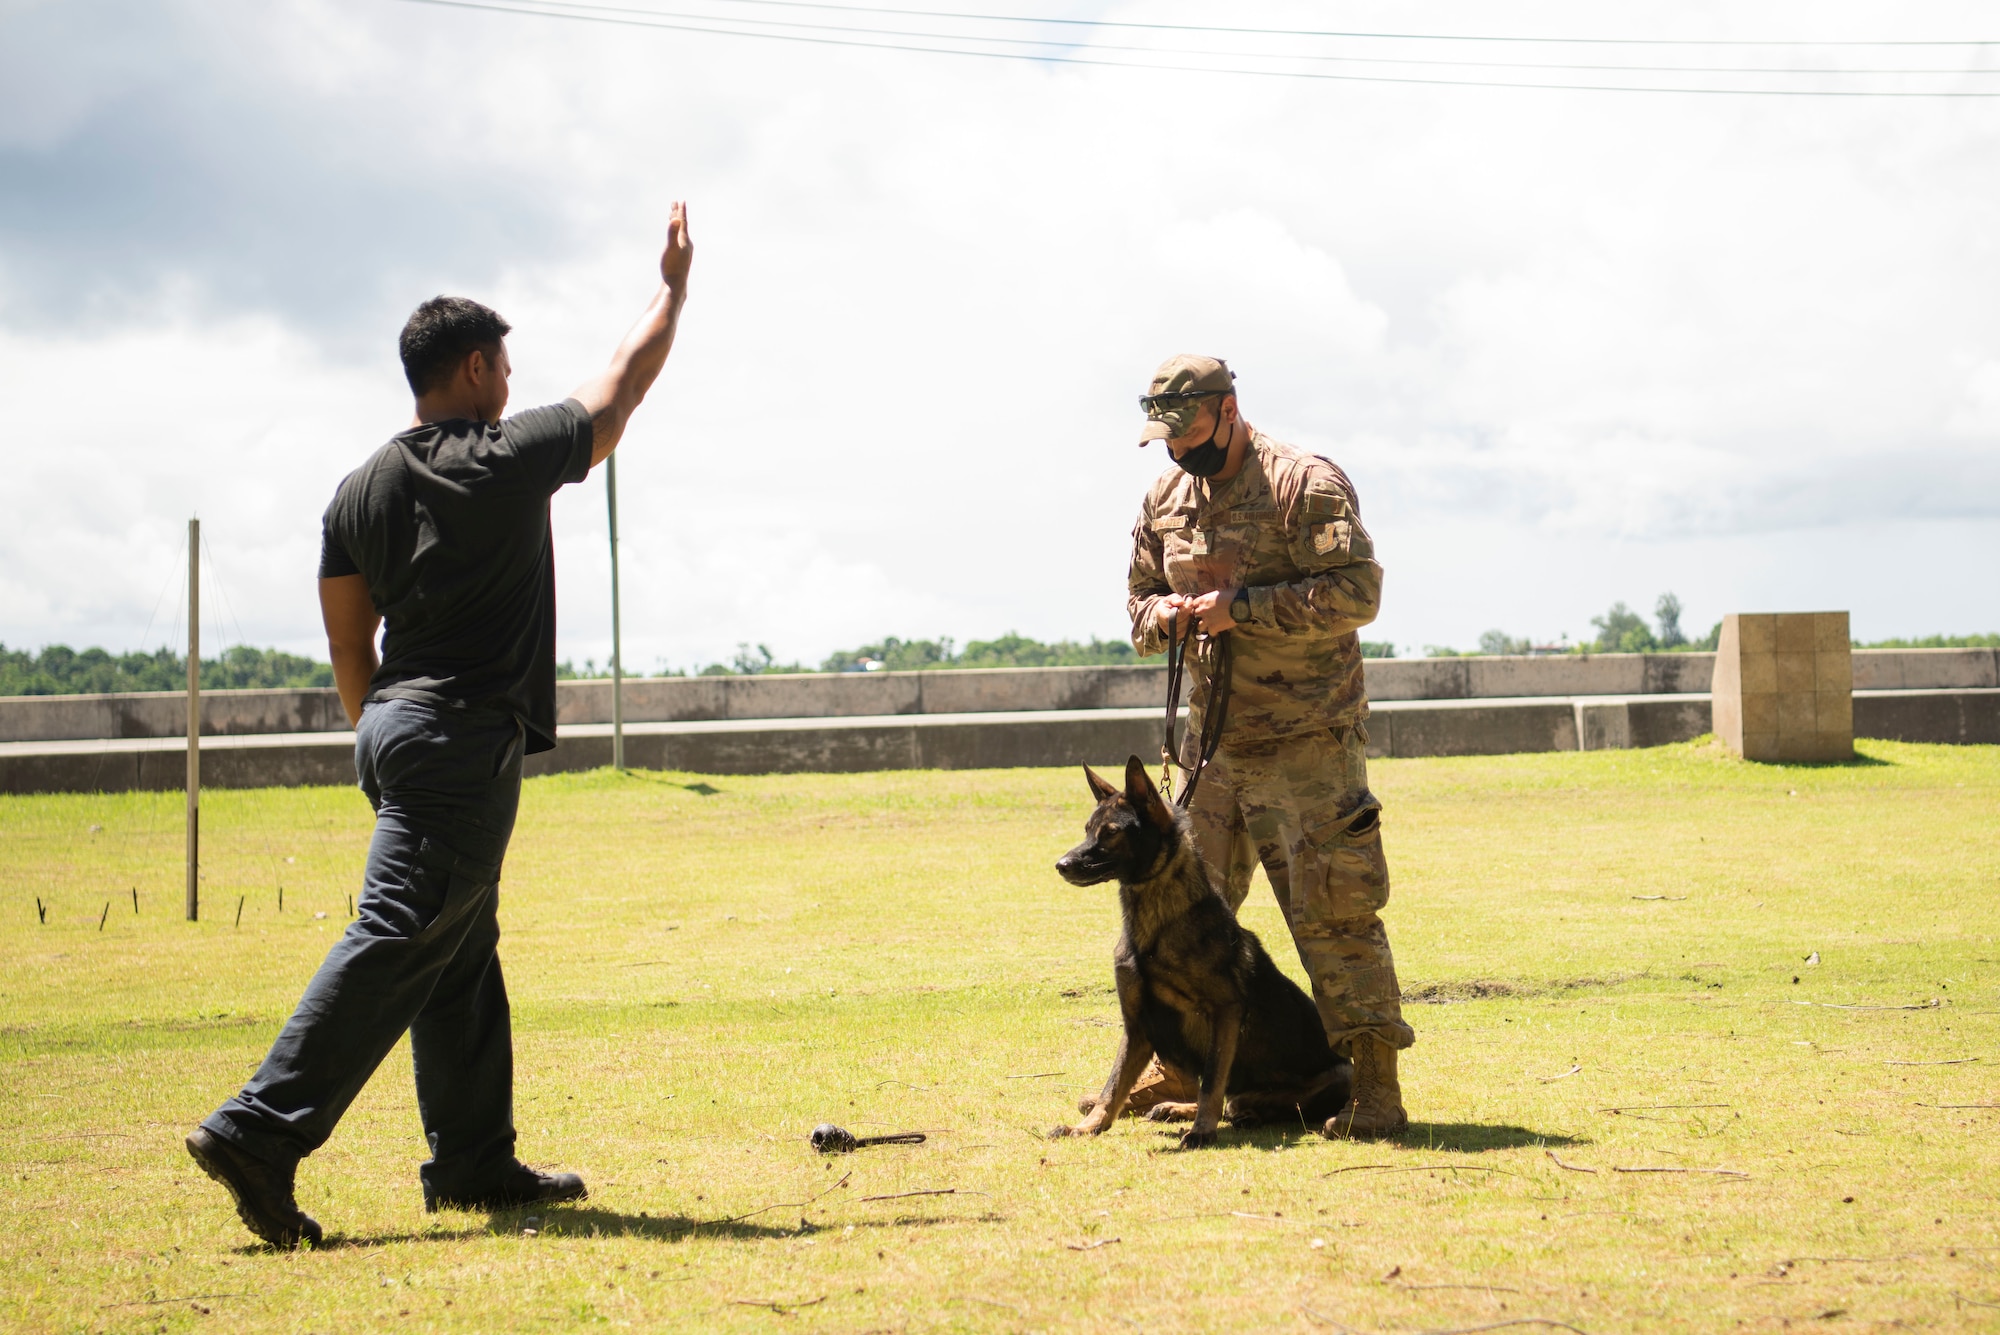 U.S. Air Force Staff Sgt. Casey Wheatley, 736th Security Forces Squadron non-commissioned officer in charge of the military working dog operations, teaches a member of Palau’s Ministry of Justice how to handle a working dog during a Mobile Training Team mission in Palau, June 23, 2021. A Mobile Training Team of subject matter experts from Andersen AFB went to teach members from the Ministry of Justice and Ministry of Public Infrastructure and Institution in Palau how to properly utilize equipment they received from the Department of Defense through 333 Funding Authority. (U.S. Air Force photo by Senior Airman Aubree Owens)